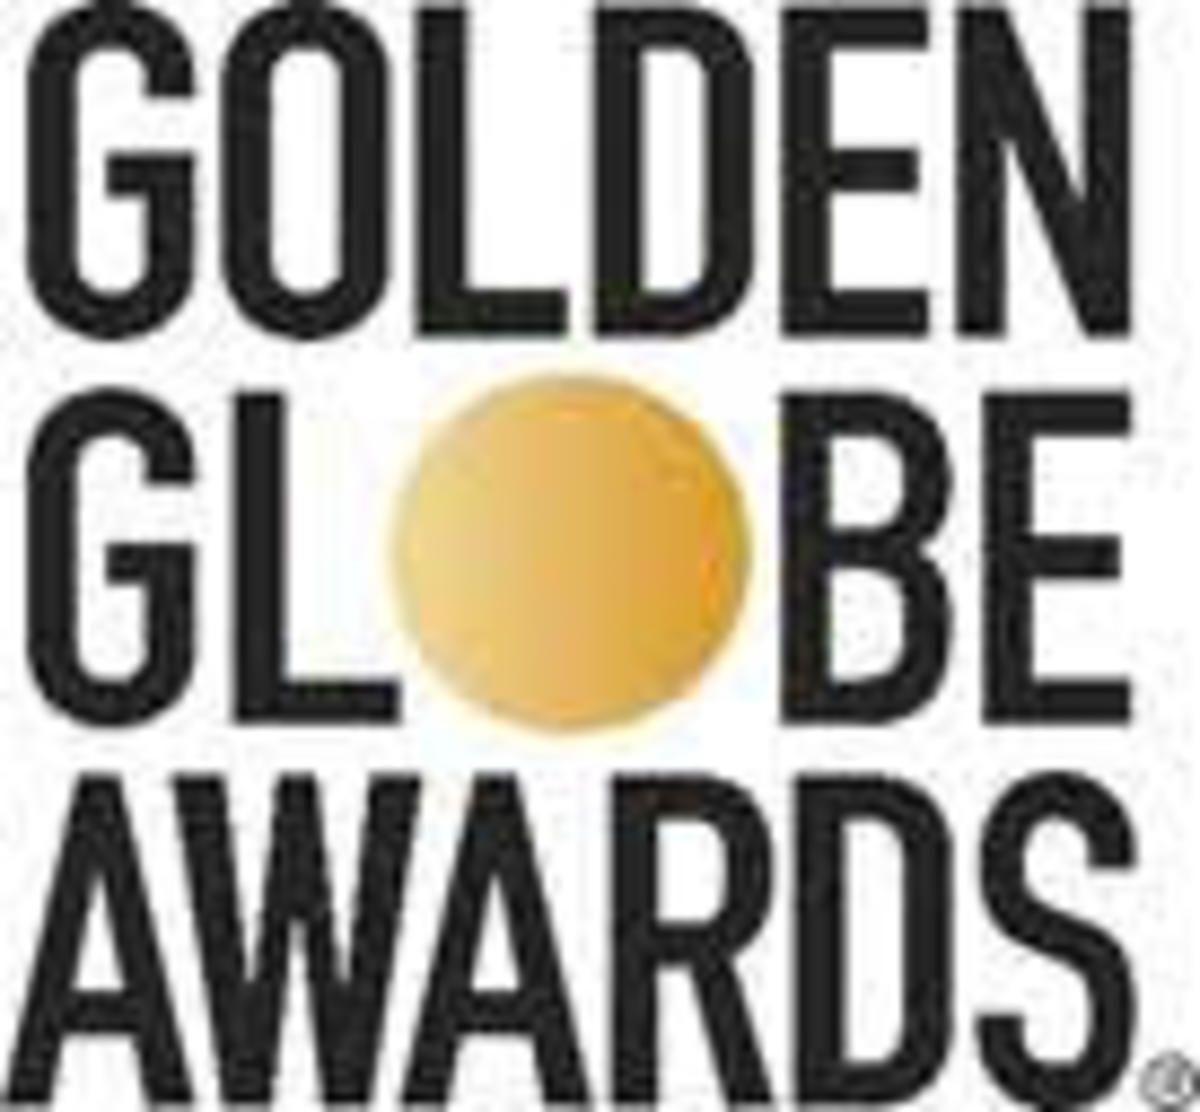 Golden Globes Logo - NBC Makes Deal to Keep Golden Globe Awards - Broadcasting & Cable